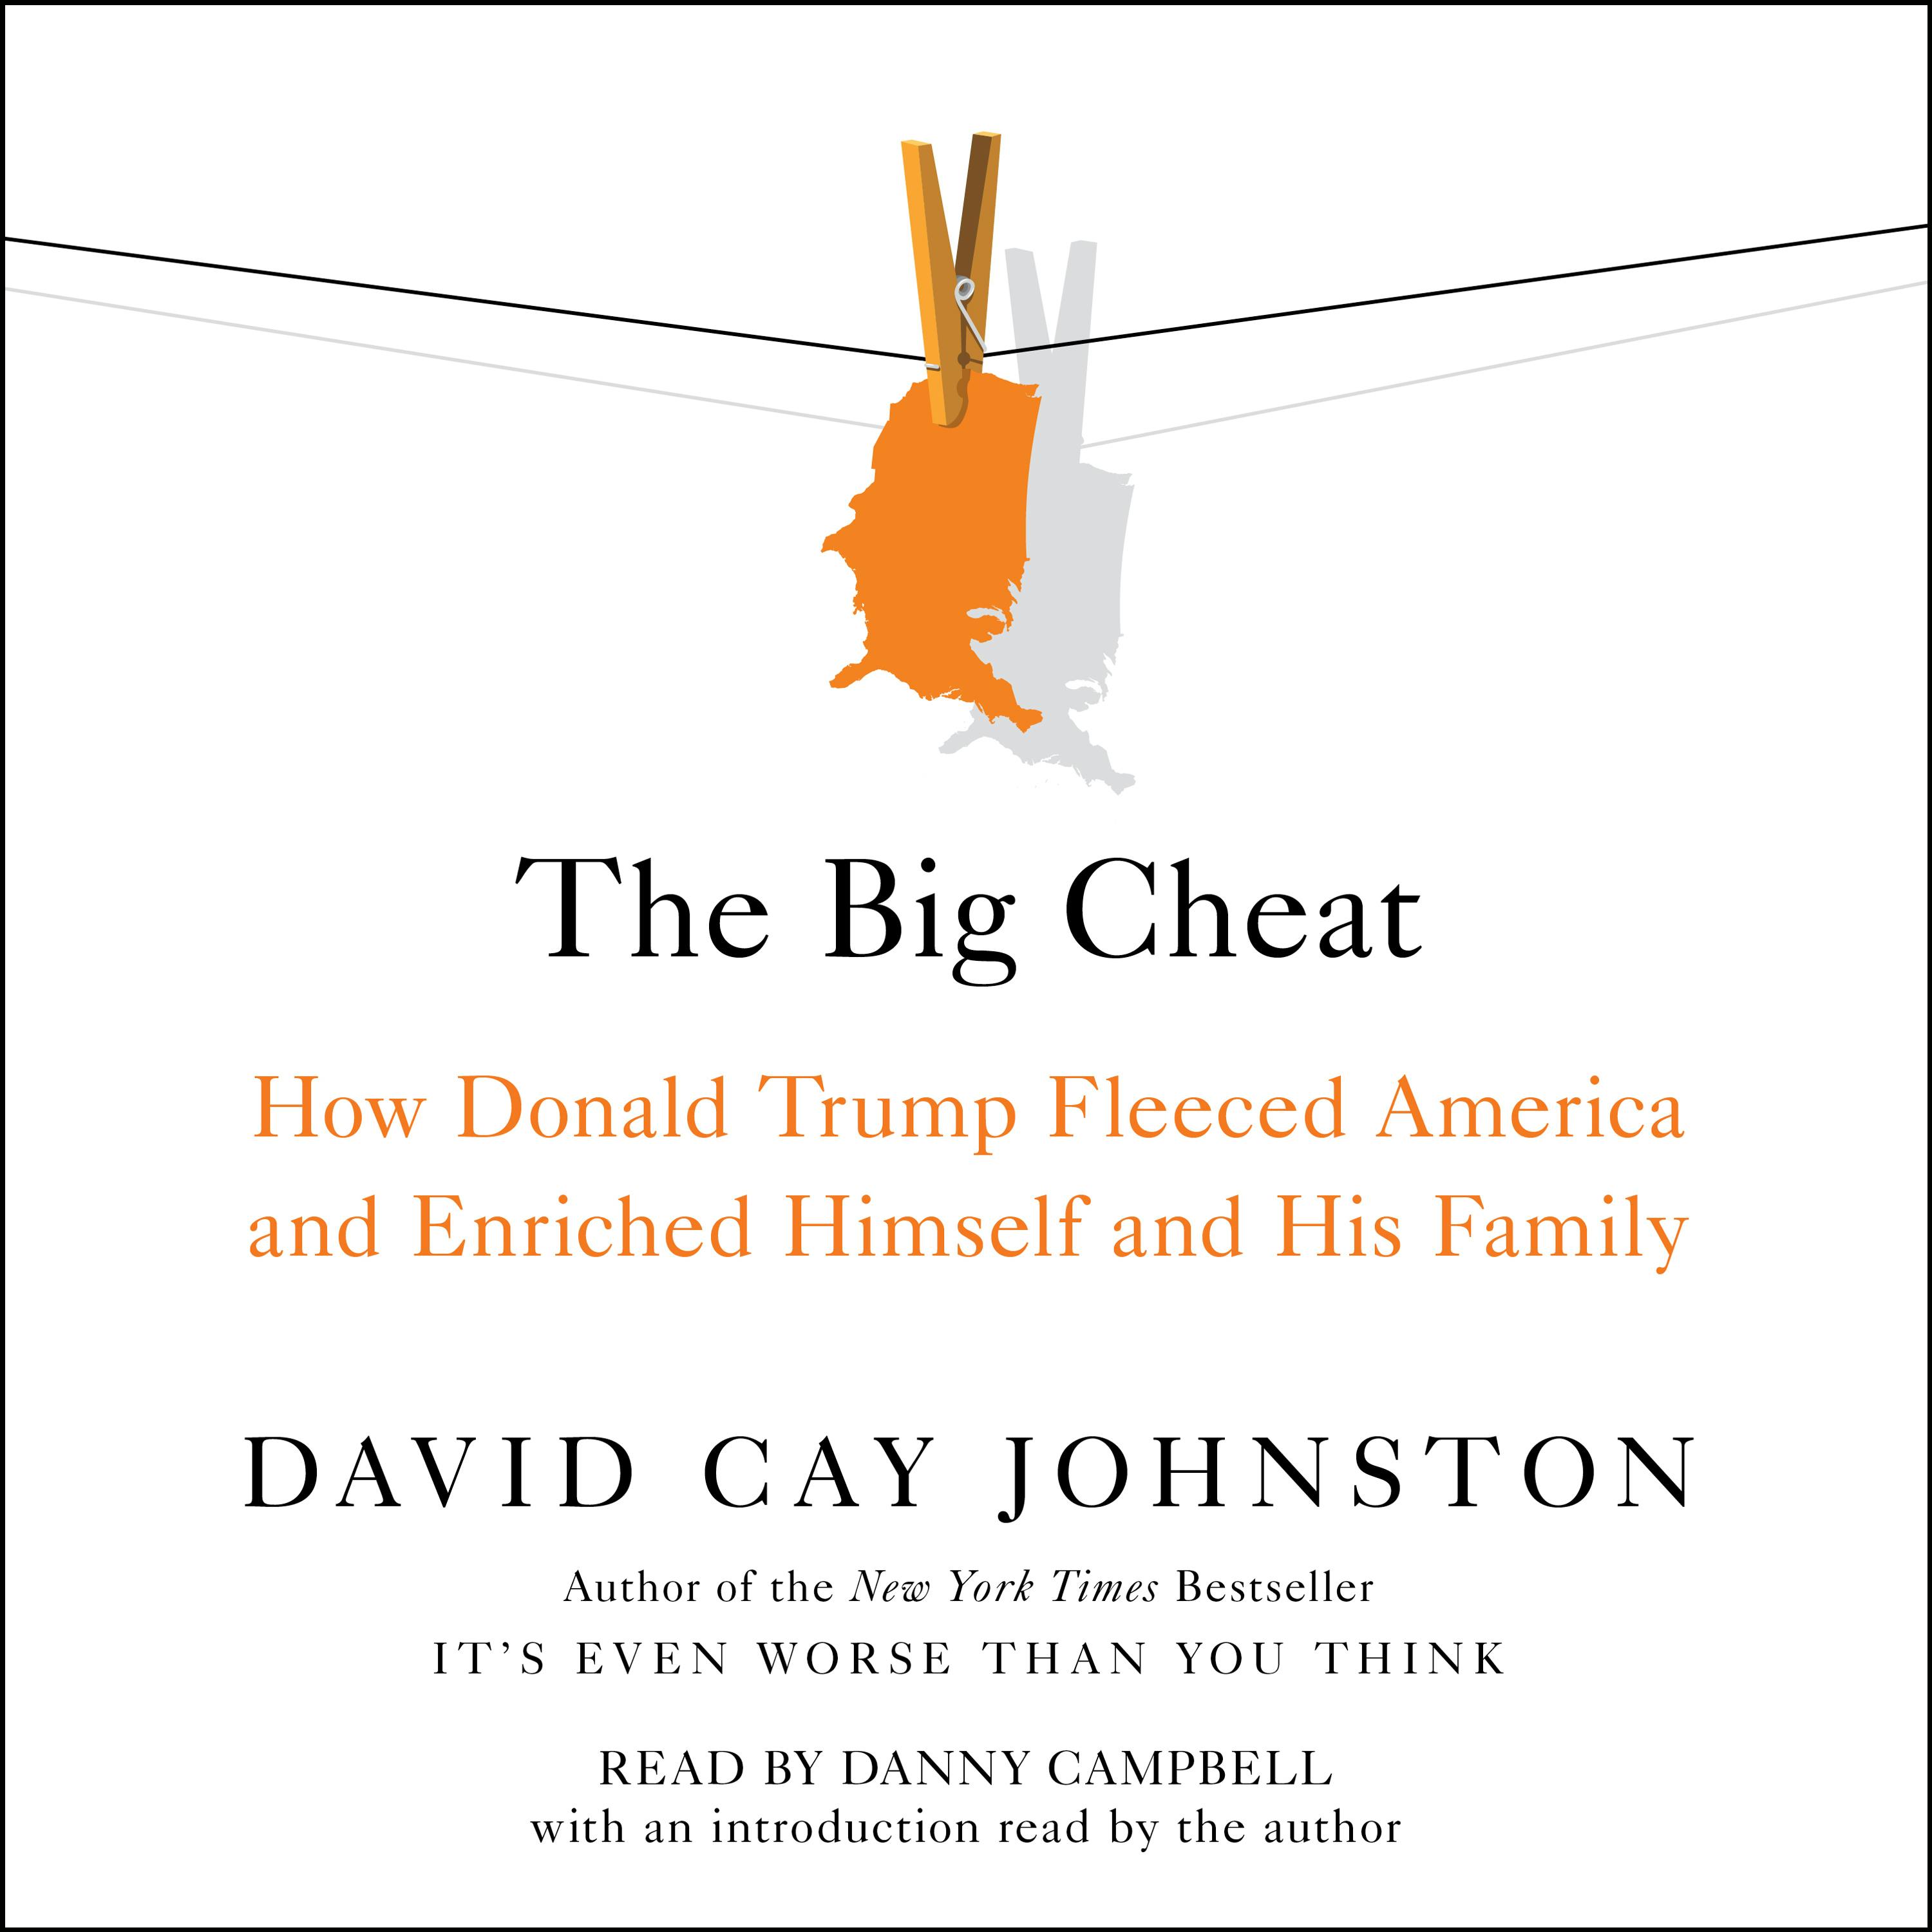 The Big Cheat: How Donald Trump Fleeced America and Enriched Himself and His Family - David Cay Johnston